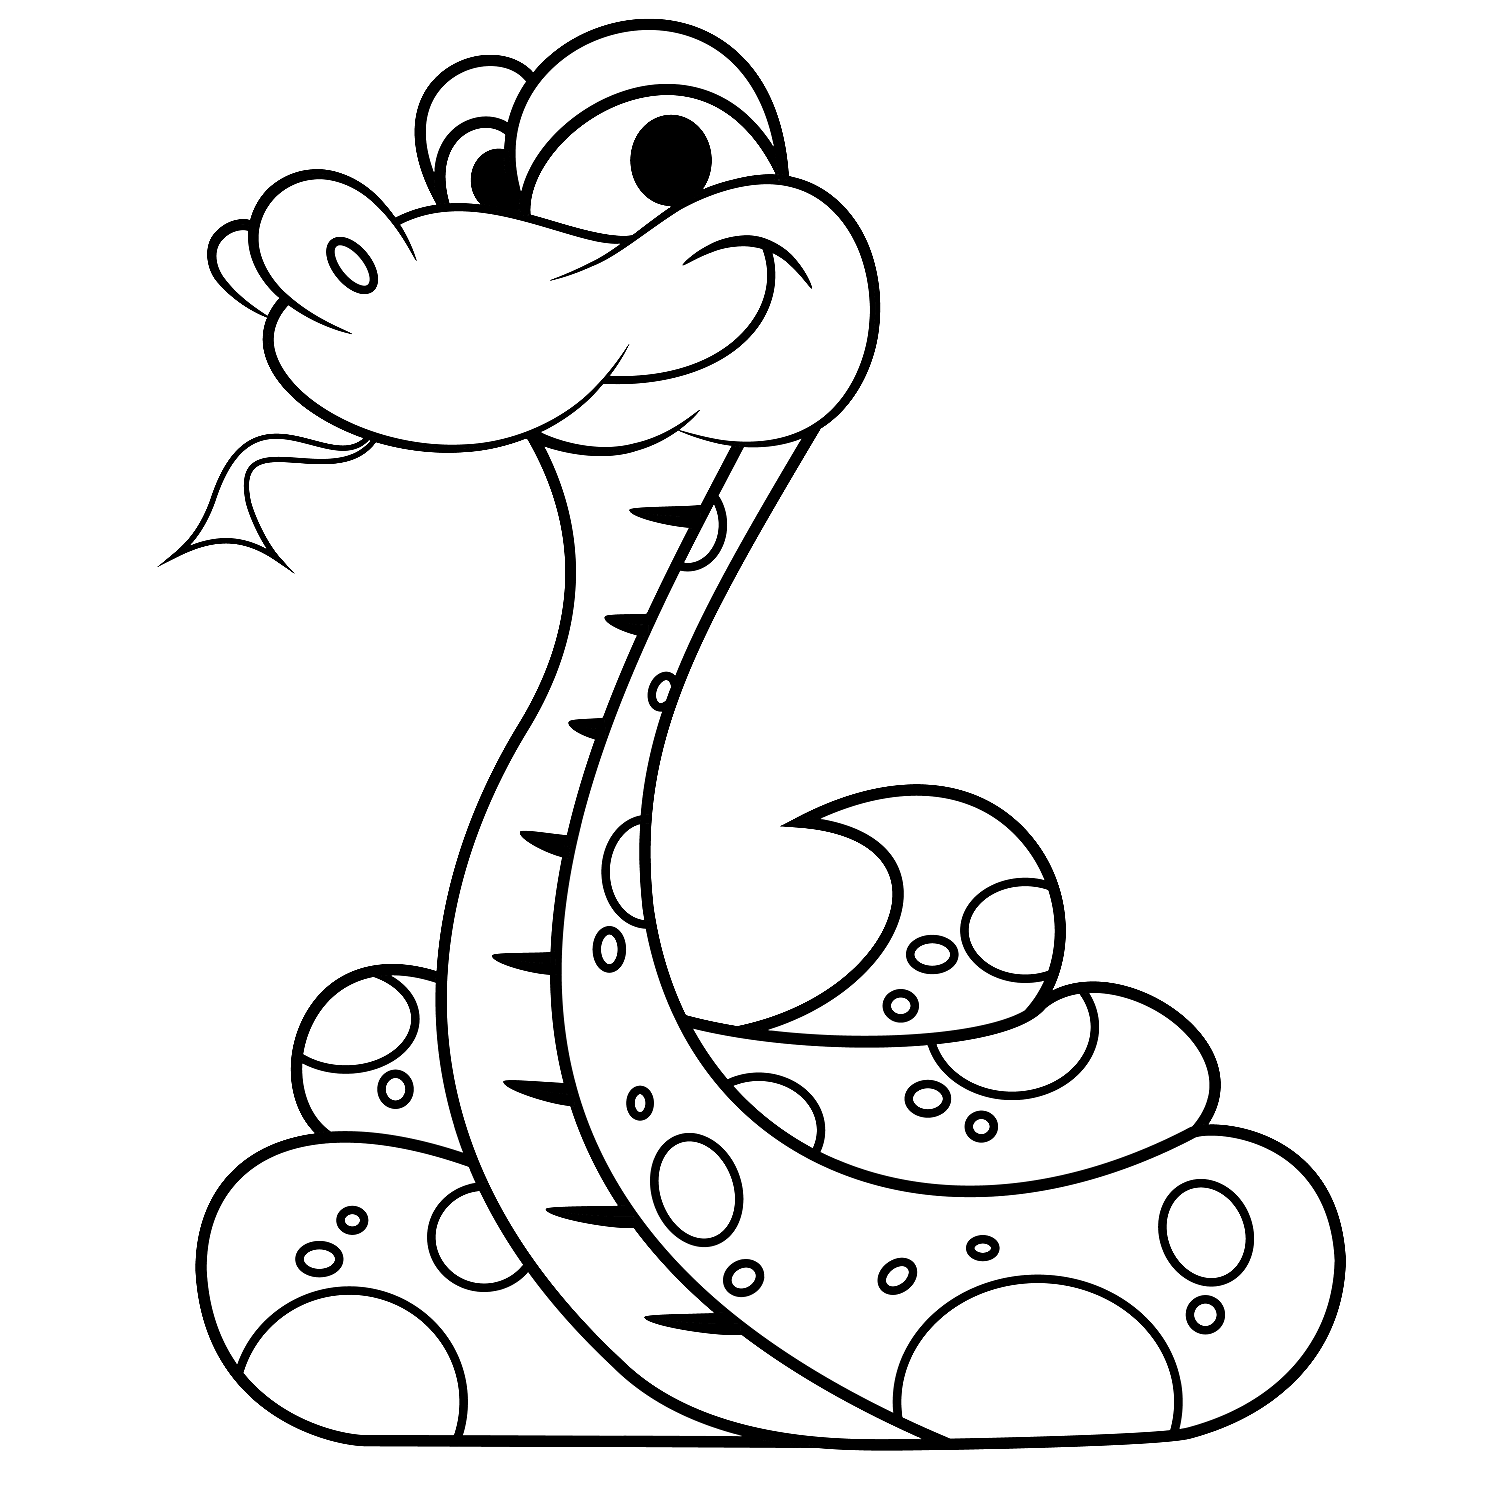 Cartoon Snake Pictures For Kids